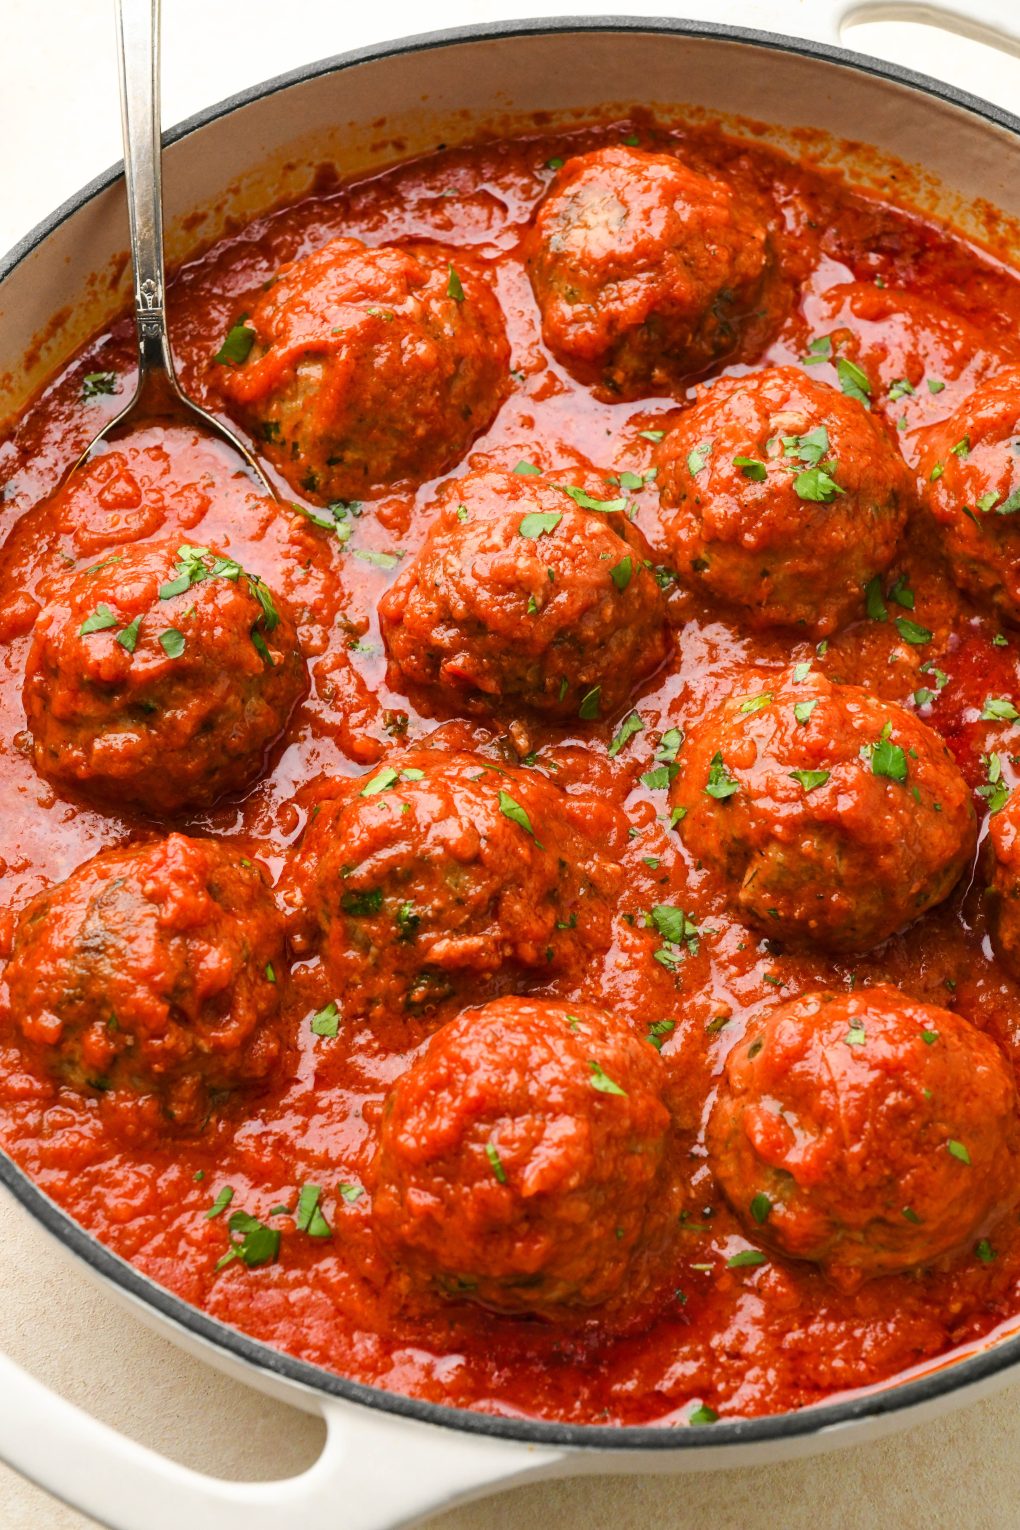 Gluten free meatballs in tomato sauce in a large skillet.